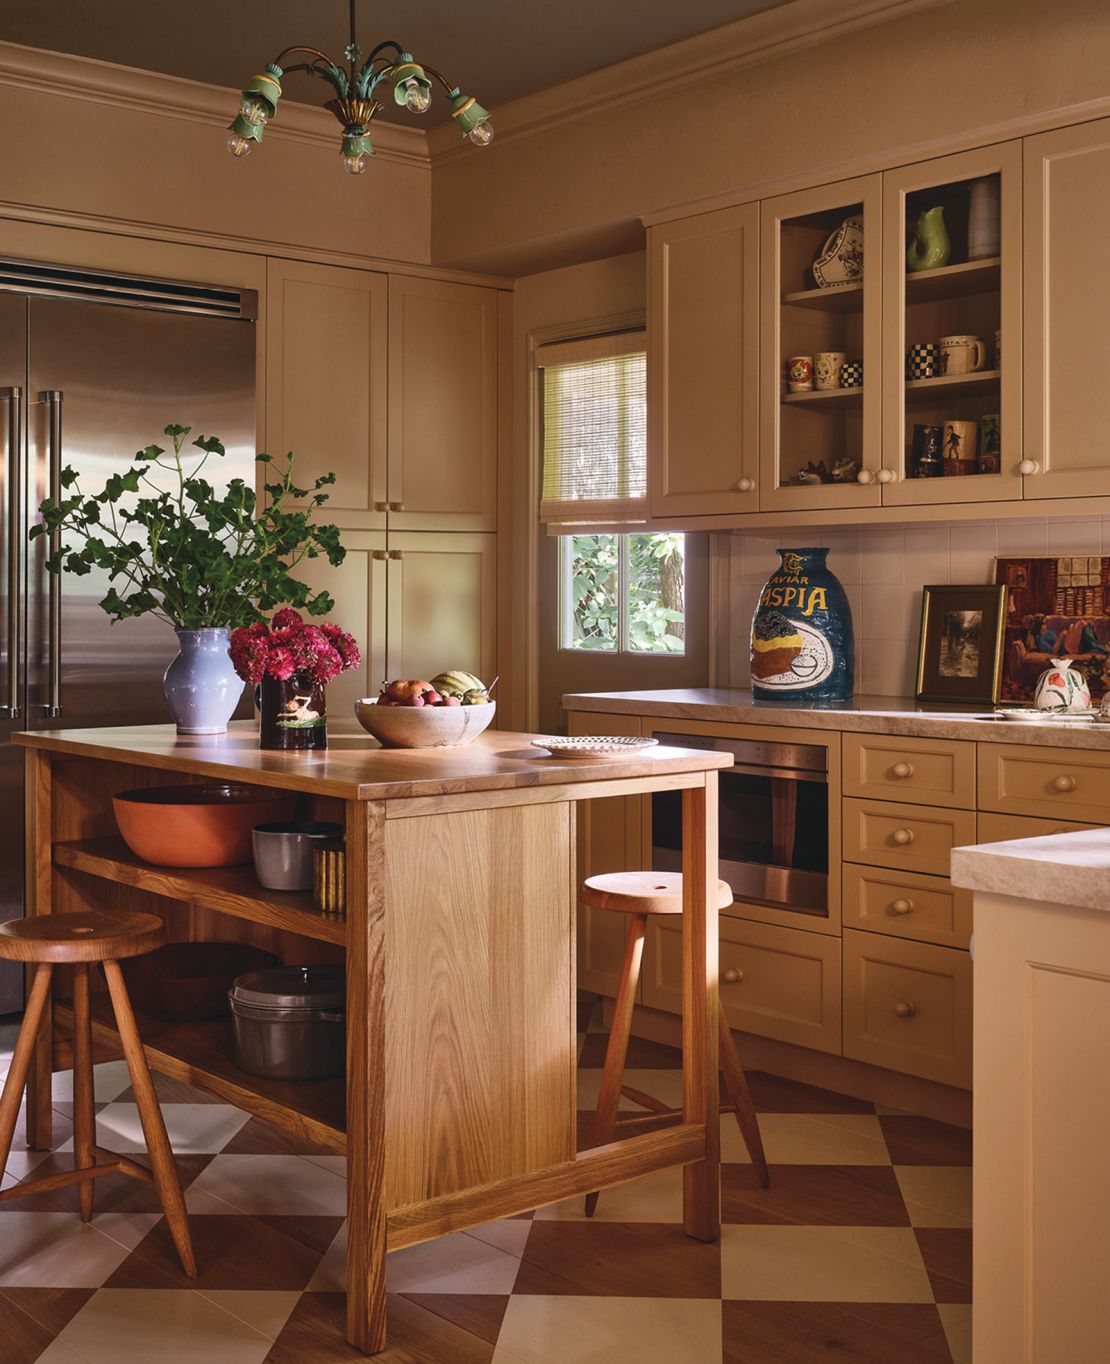 While most of the pieces in Roberts' home are antique or designer, her open kitchen includes an affordable surprise.